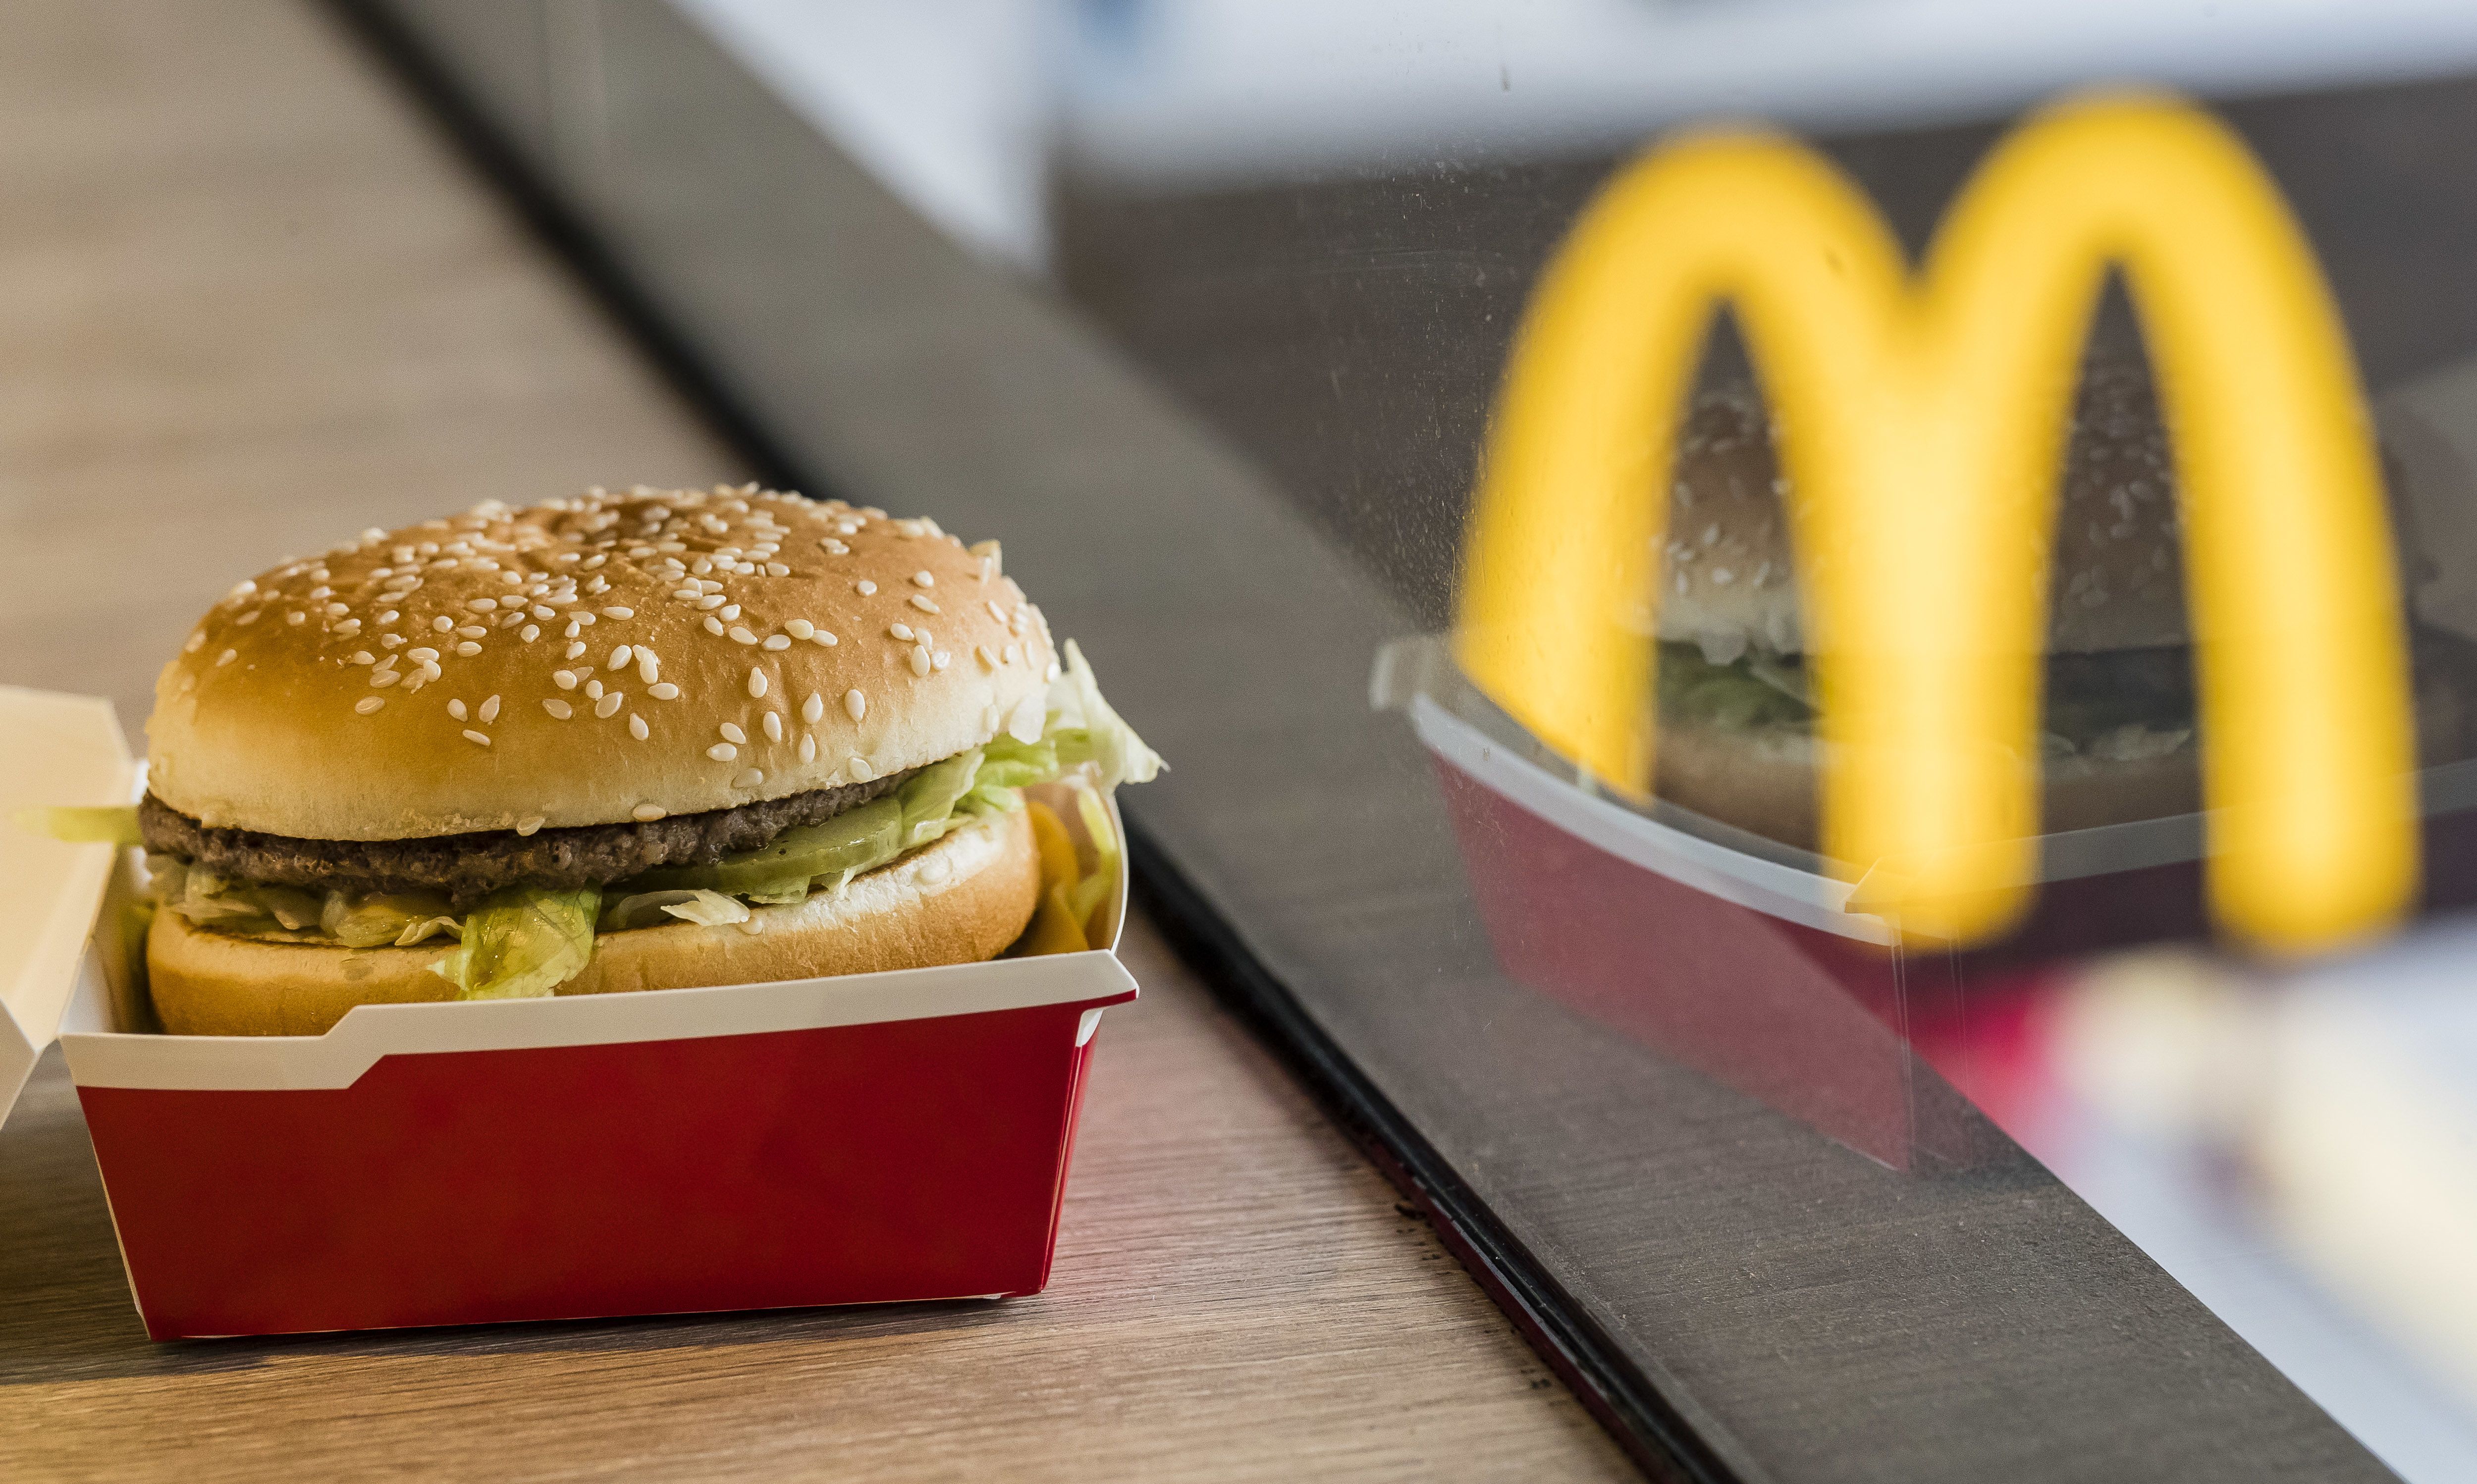 McDonald's says that it has no plans to add a plant-based burger yet